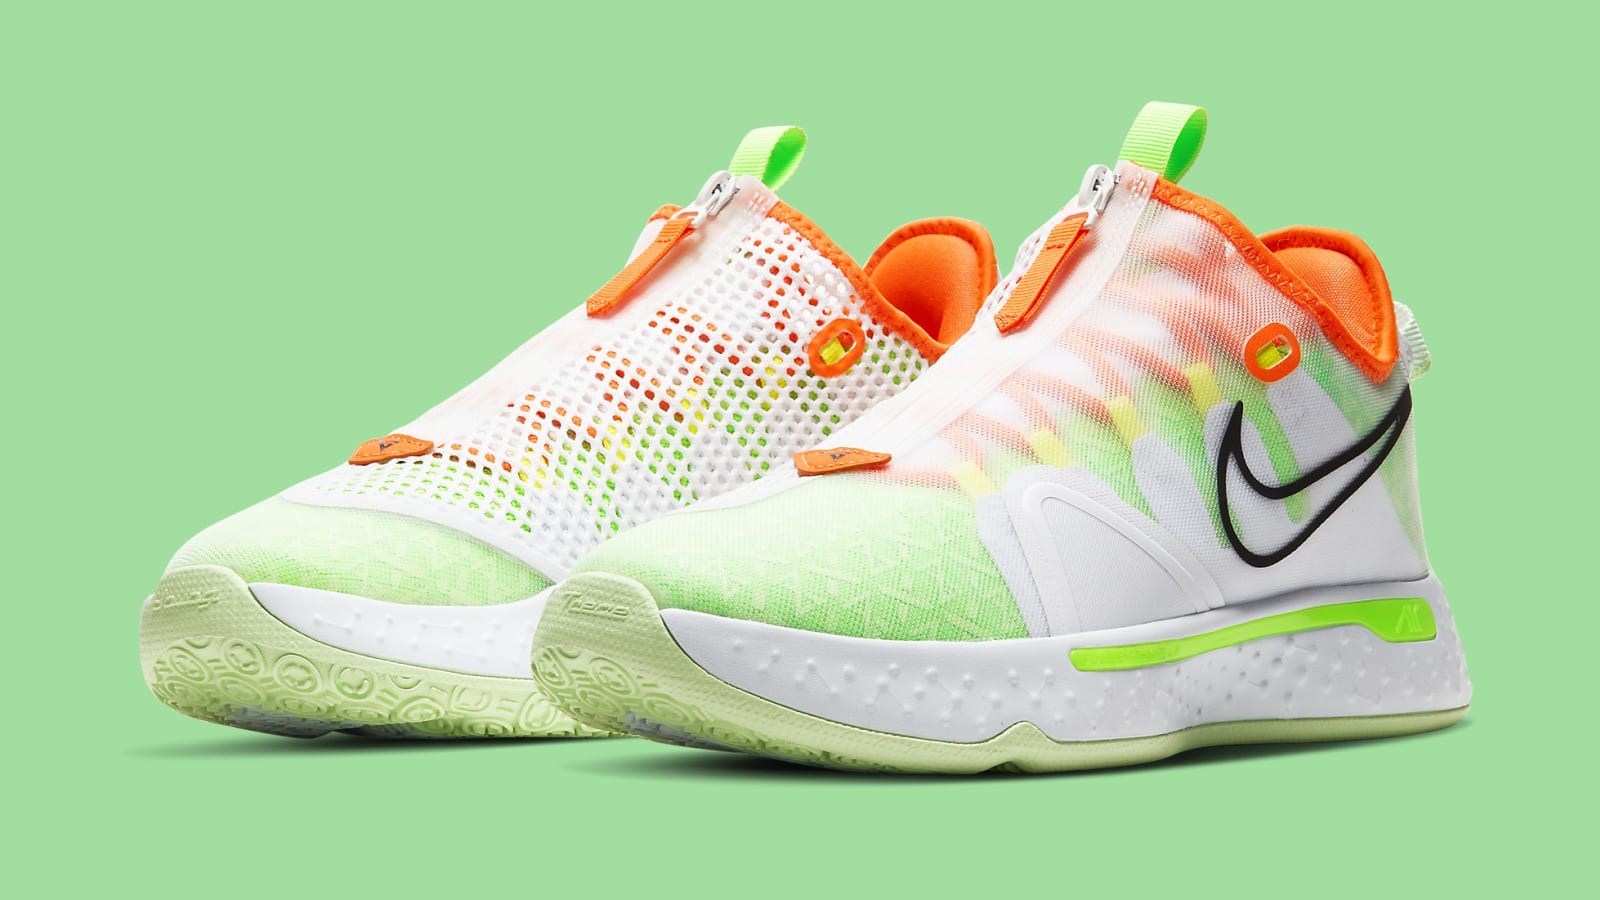 Paul George's Nike PG 4 Gets Another Gatorade Colorway: Photos